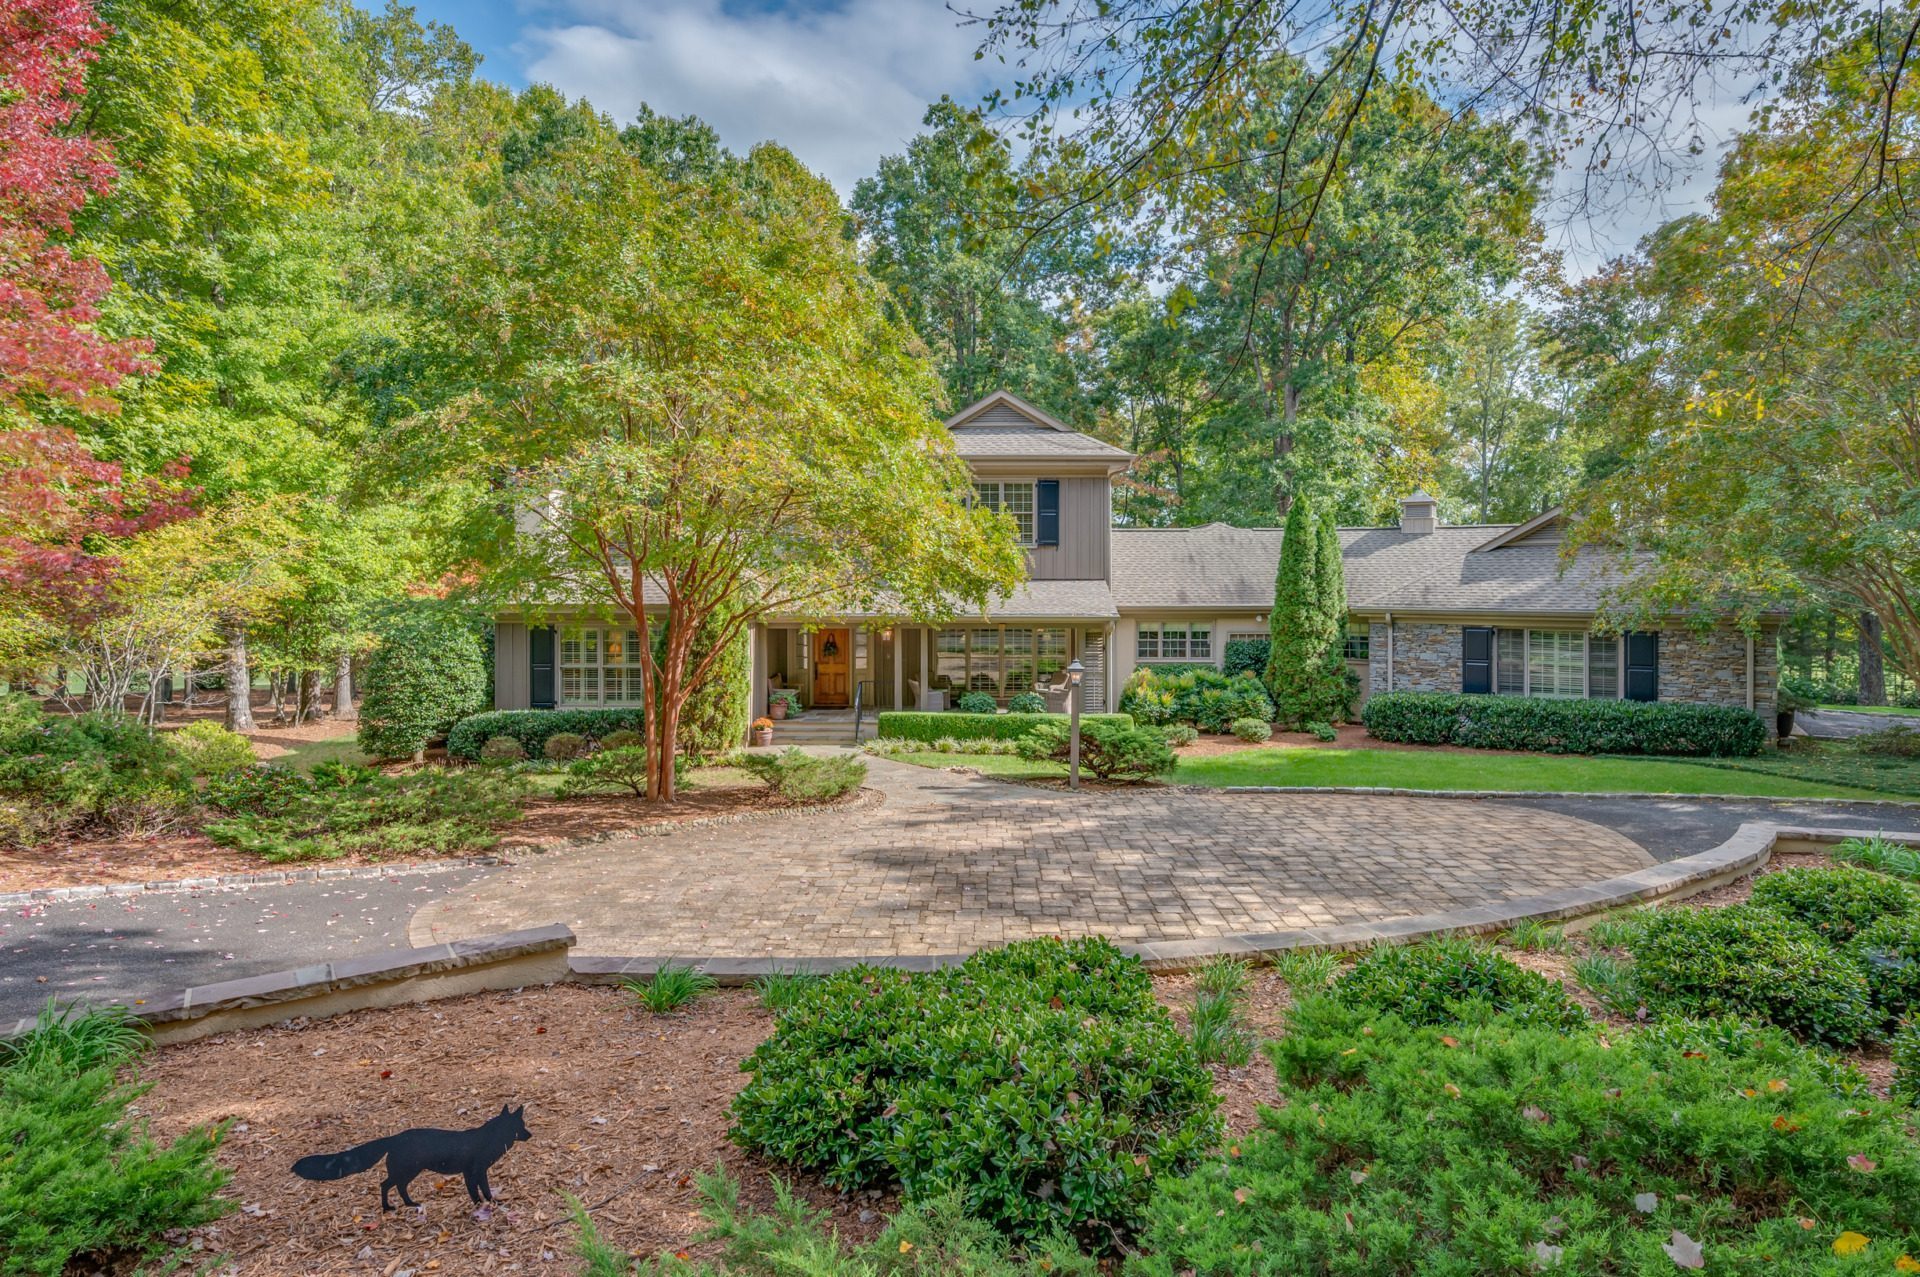 Sold: Spectacular Home on 31 Acres